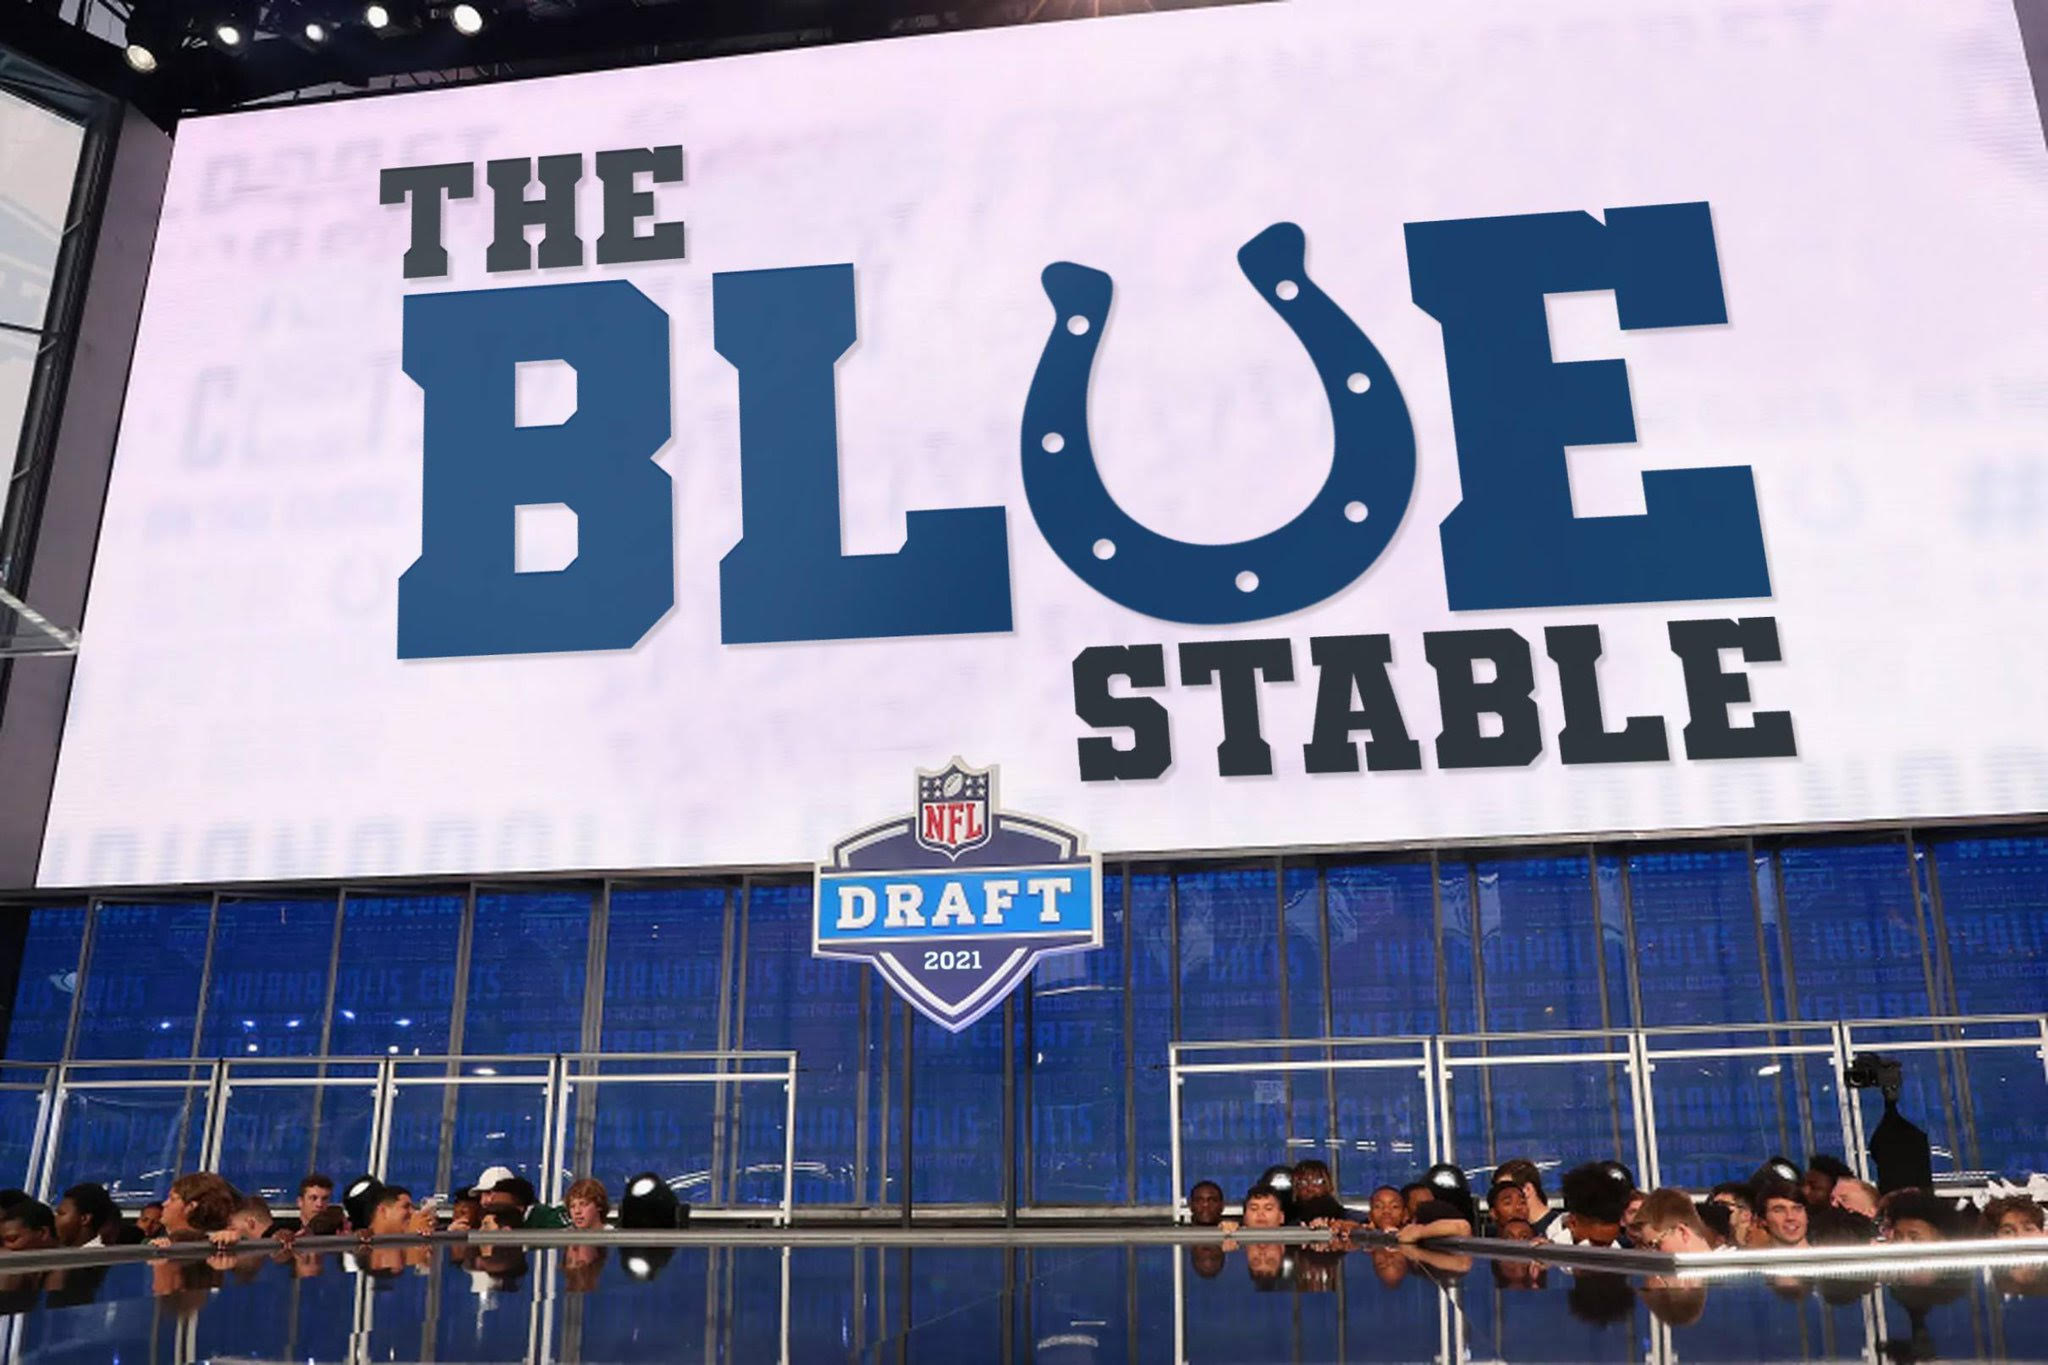 Live Experience From the 2022 NFL Draft in Las Vegas